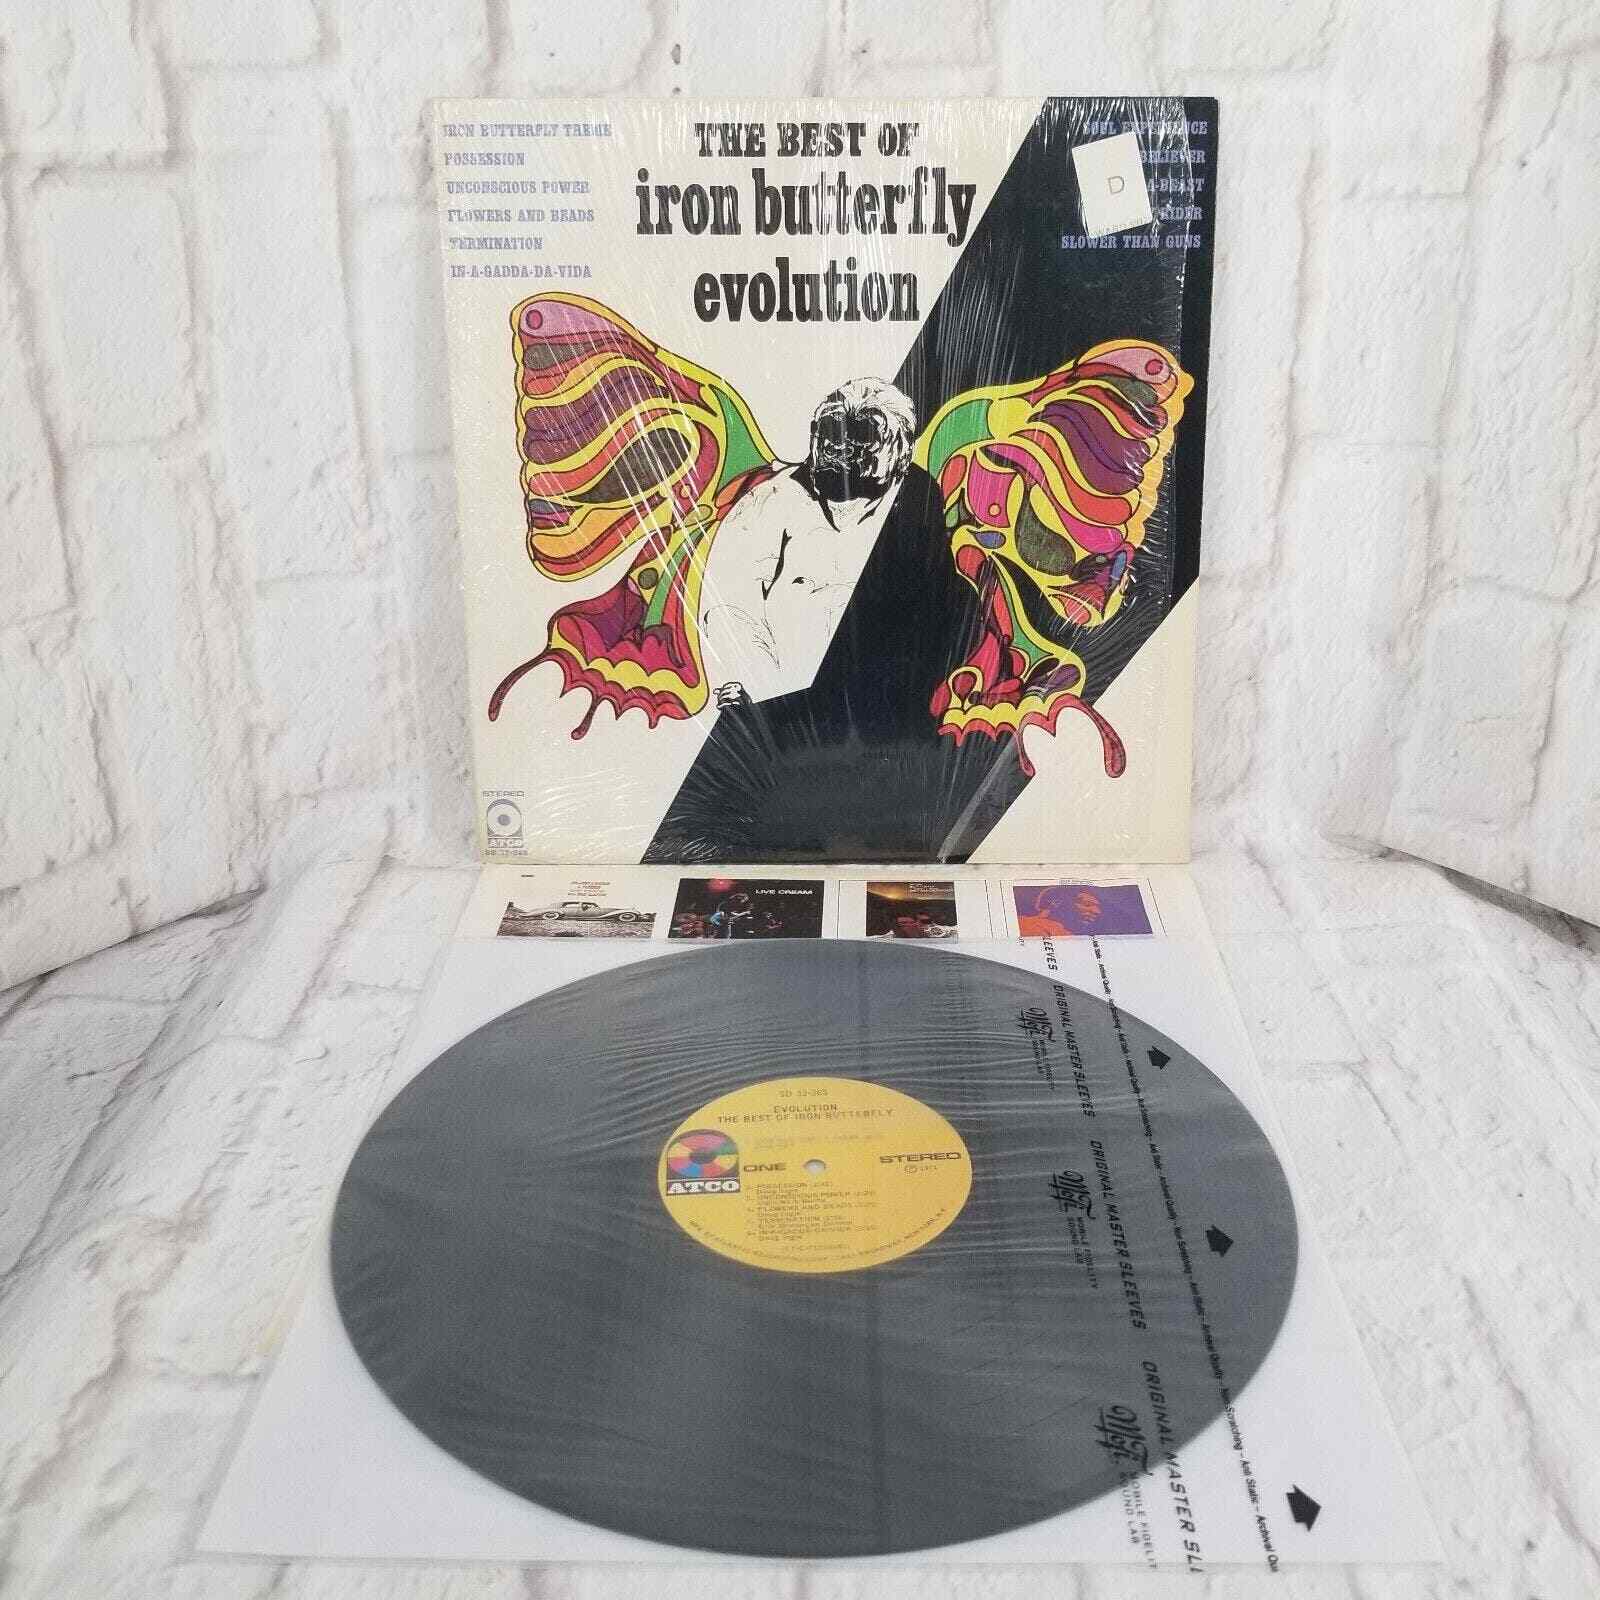 THE BEST OF IRON BUTTERFLY EVOLUTION LP SD 33 369 shrink 1971 atco